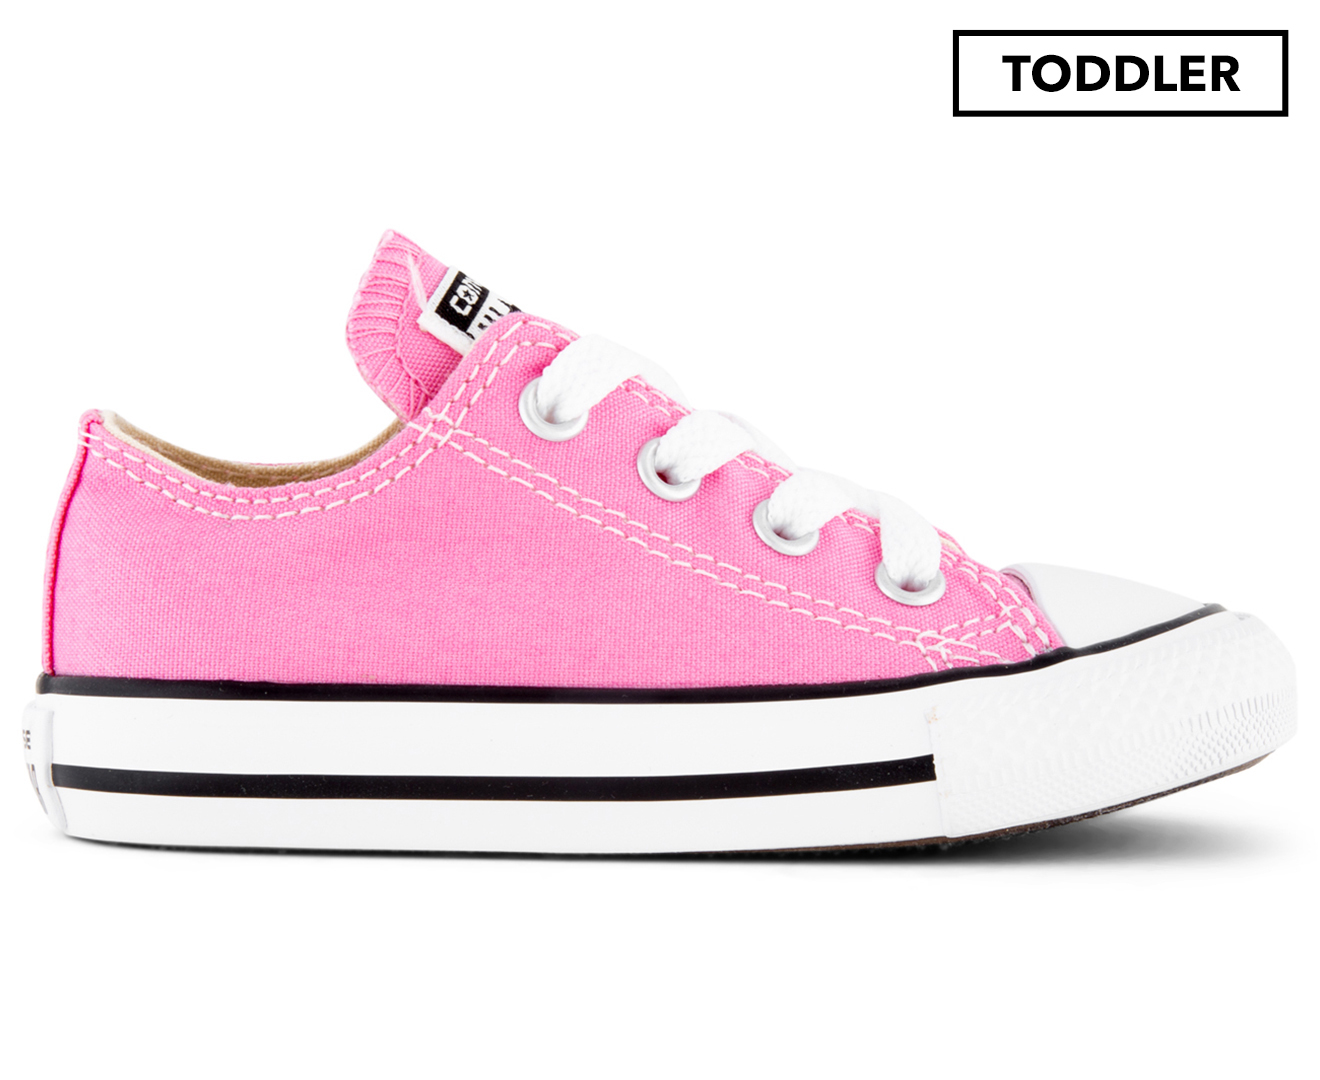 Converse Toddler Chuck Taylor All Star Low Top Sneakers - Pink | Catch ...